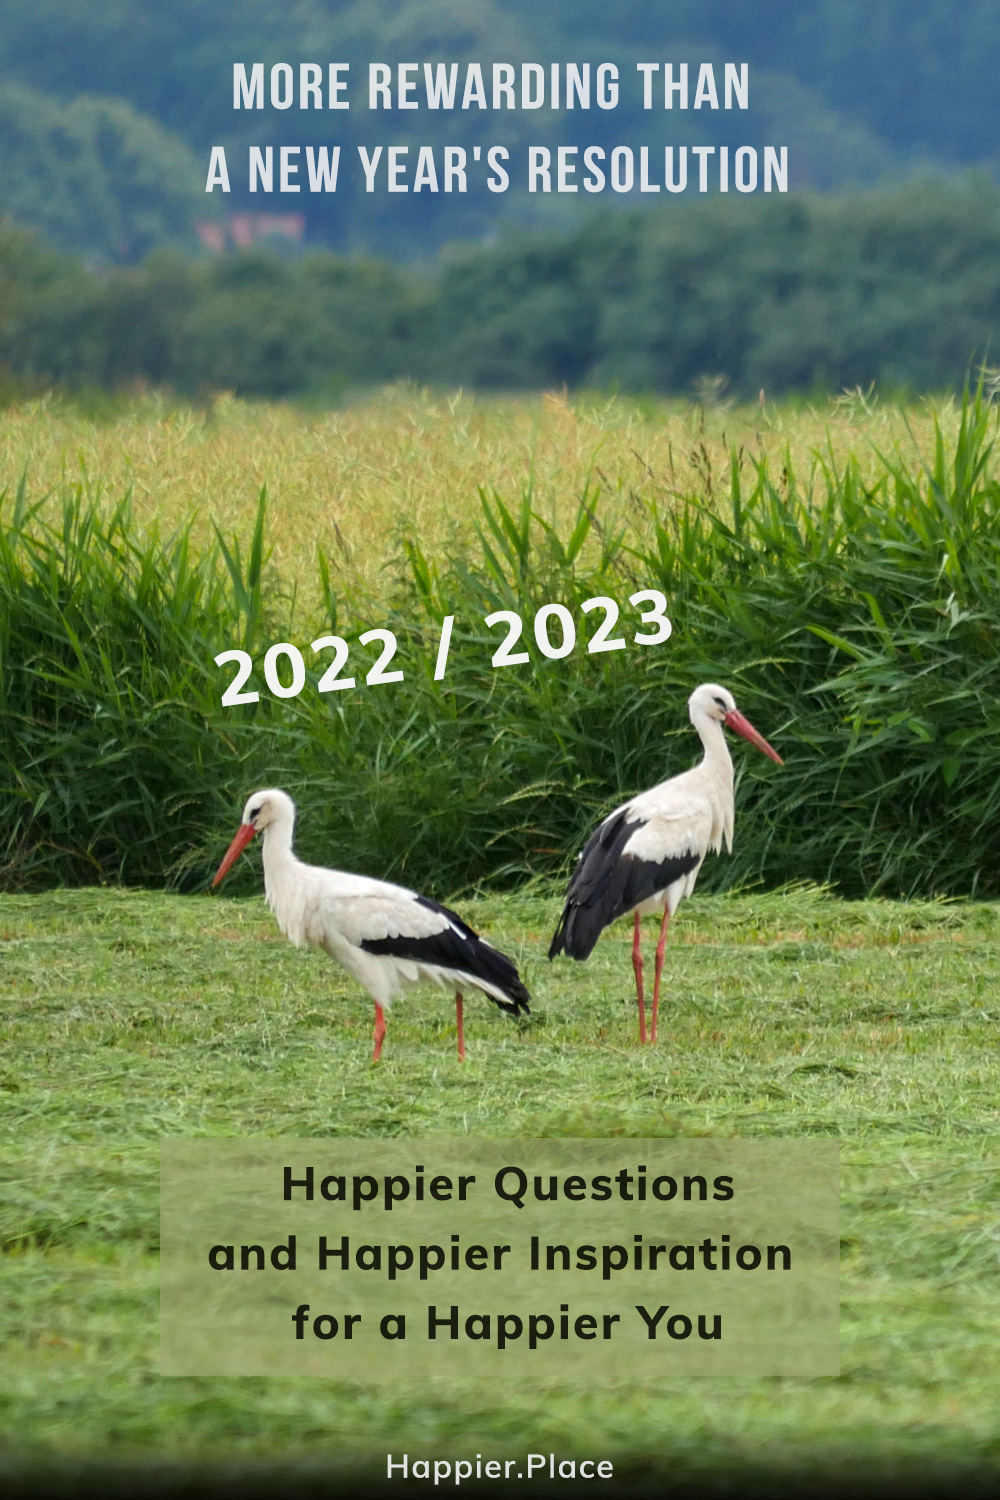 more rewarding than new year's resolution, 2022 2023 Happier Questions Inspiration for a happier You, European storks